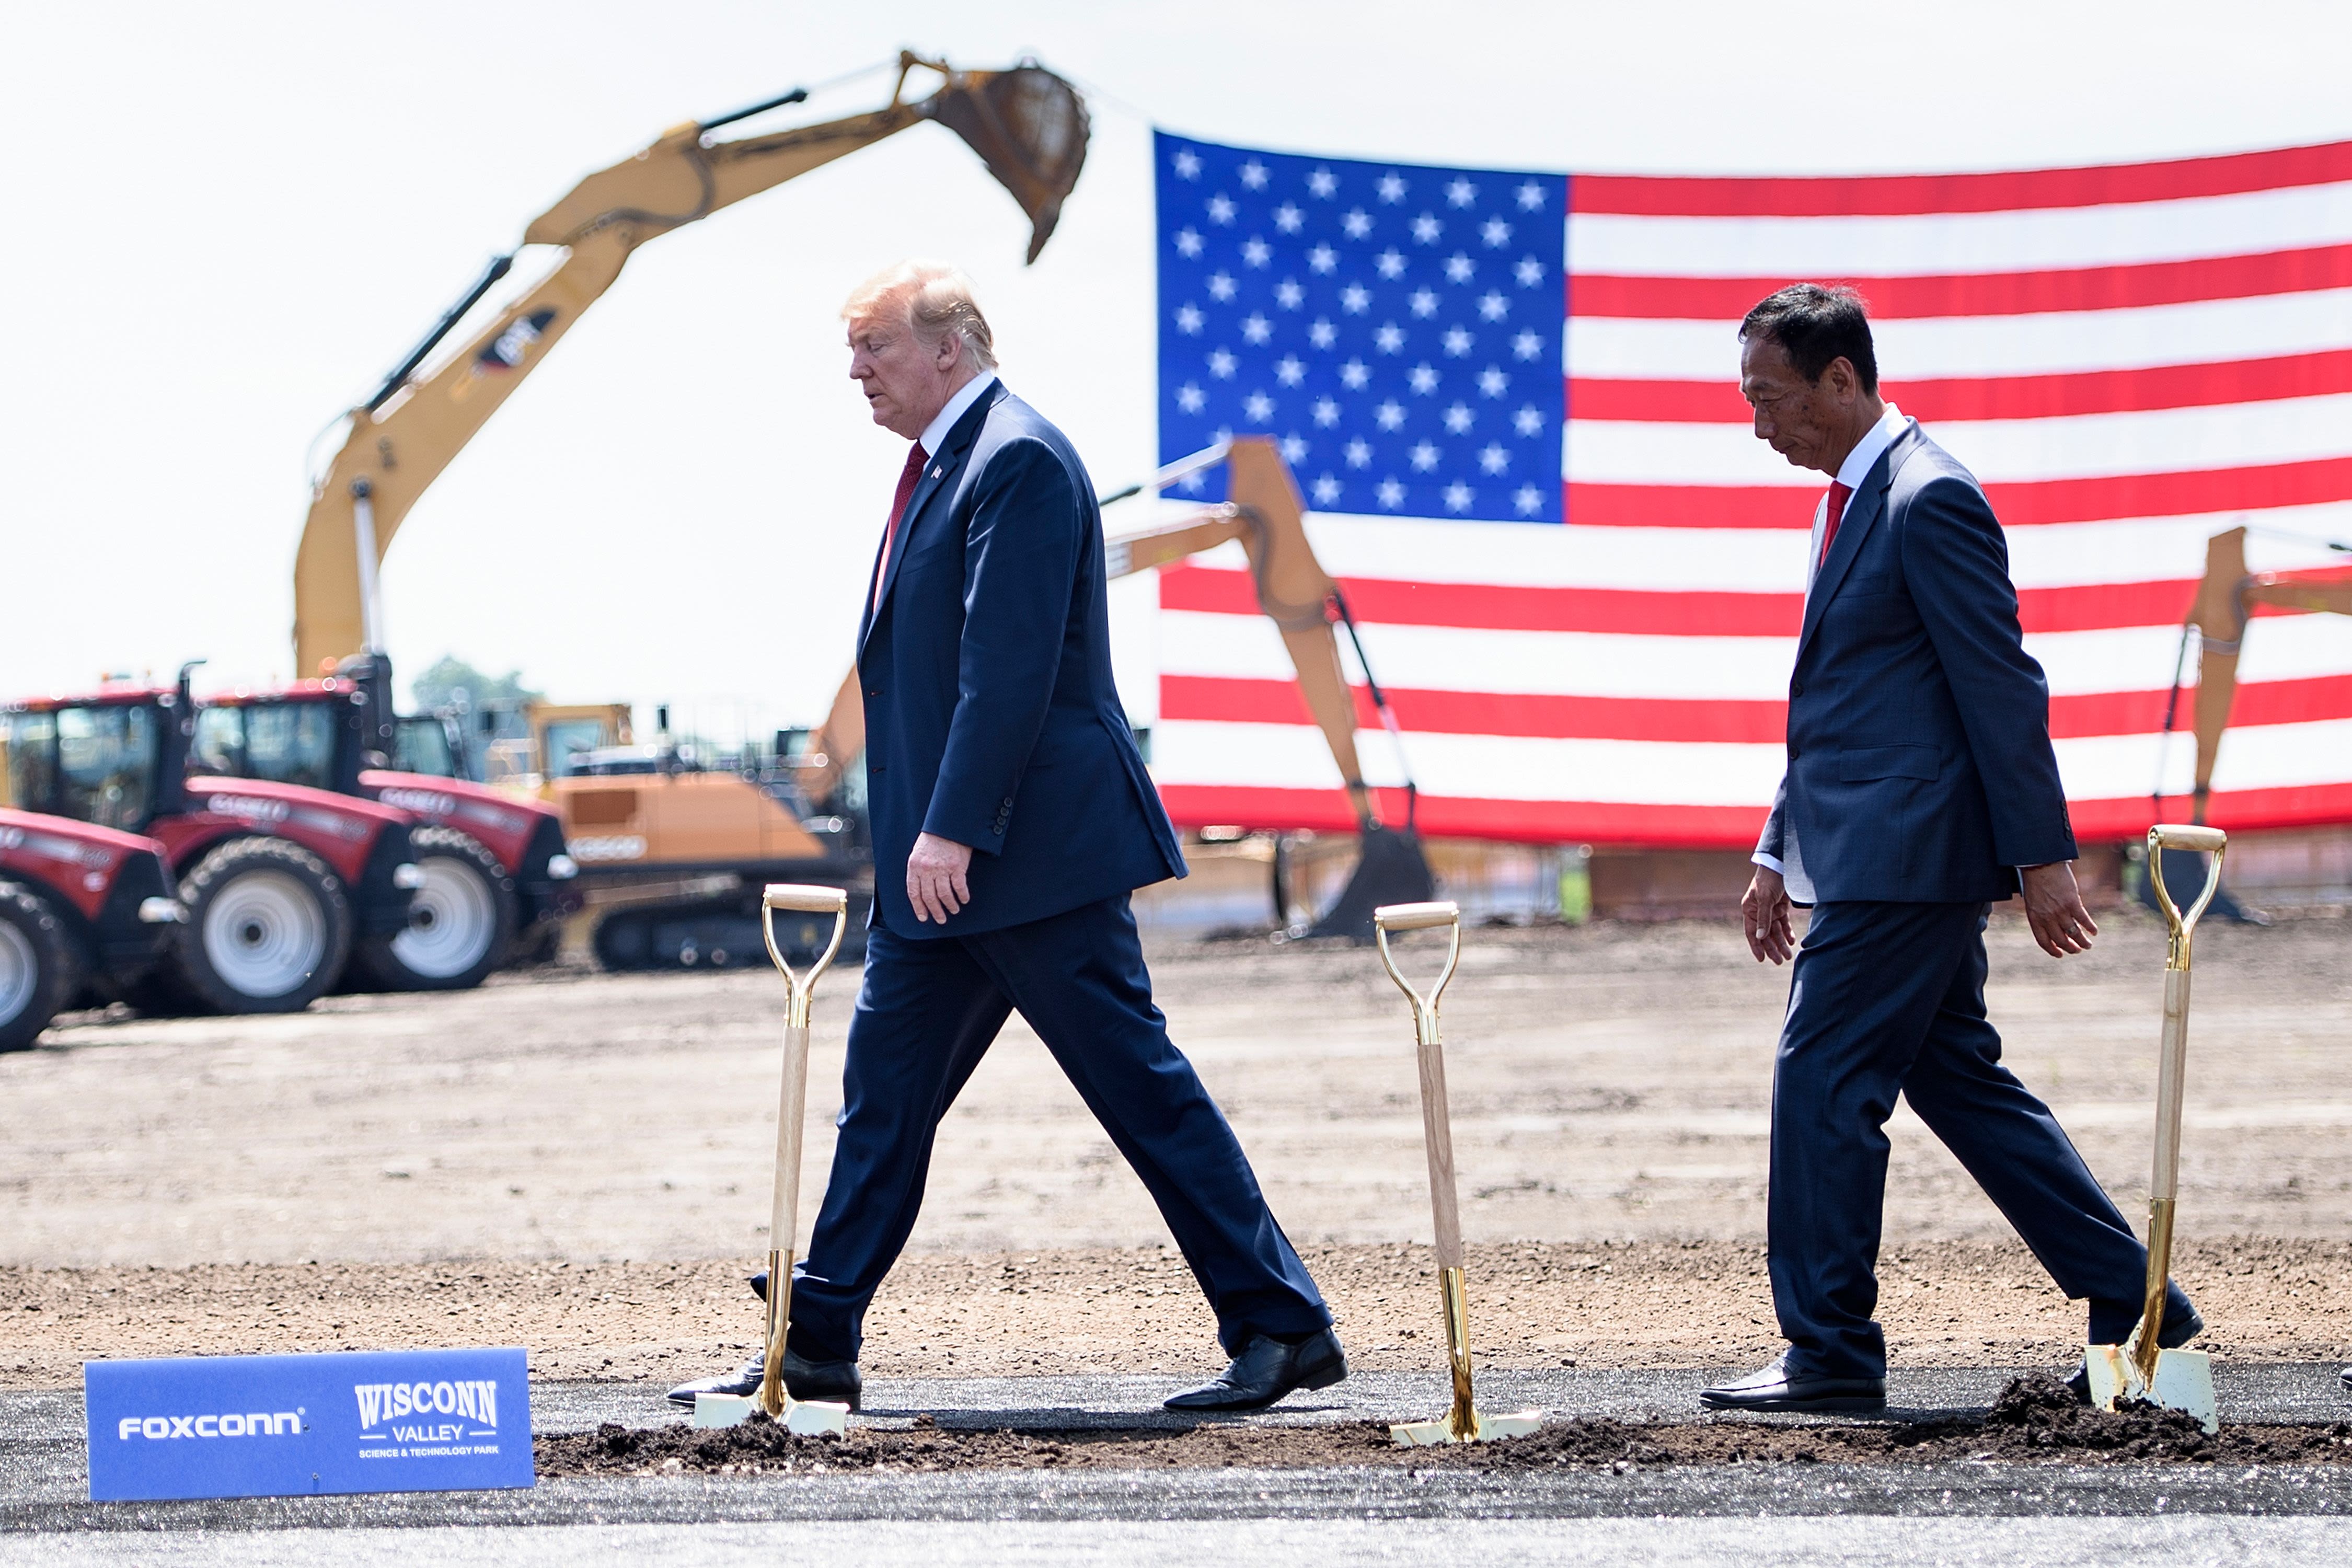 White House says Foxconn will invest further in Wisconsin